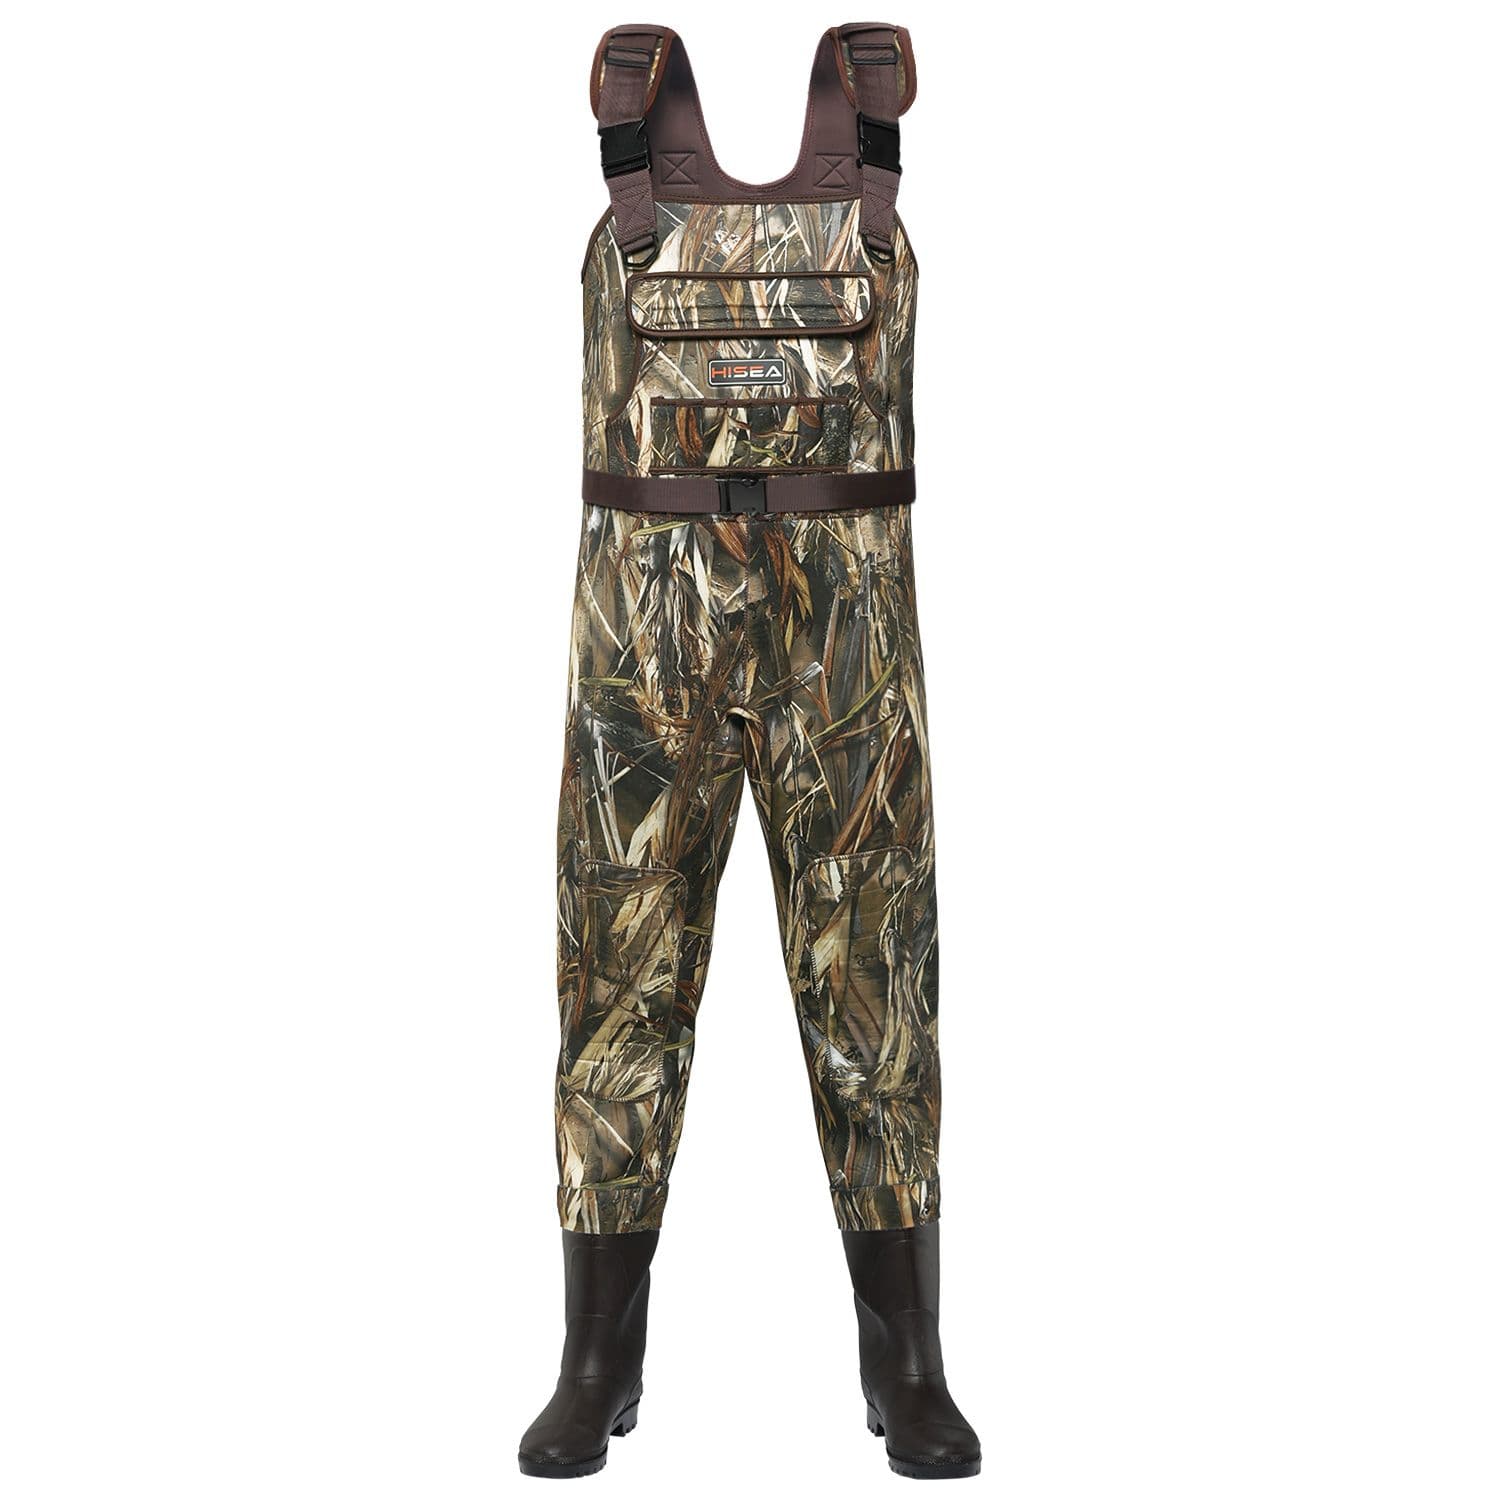 Hisea Hunting Chest Waders for Men with 600g Insulated Boots adult unisex Size: M7/W9